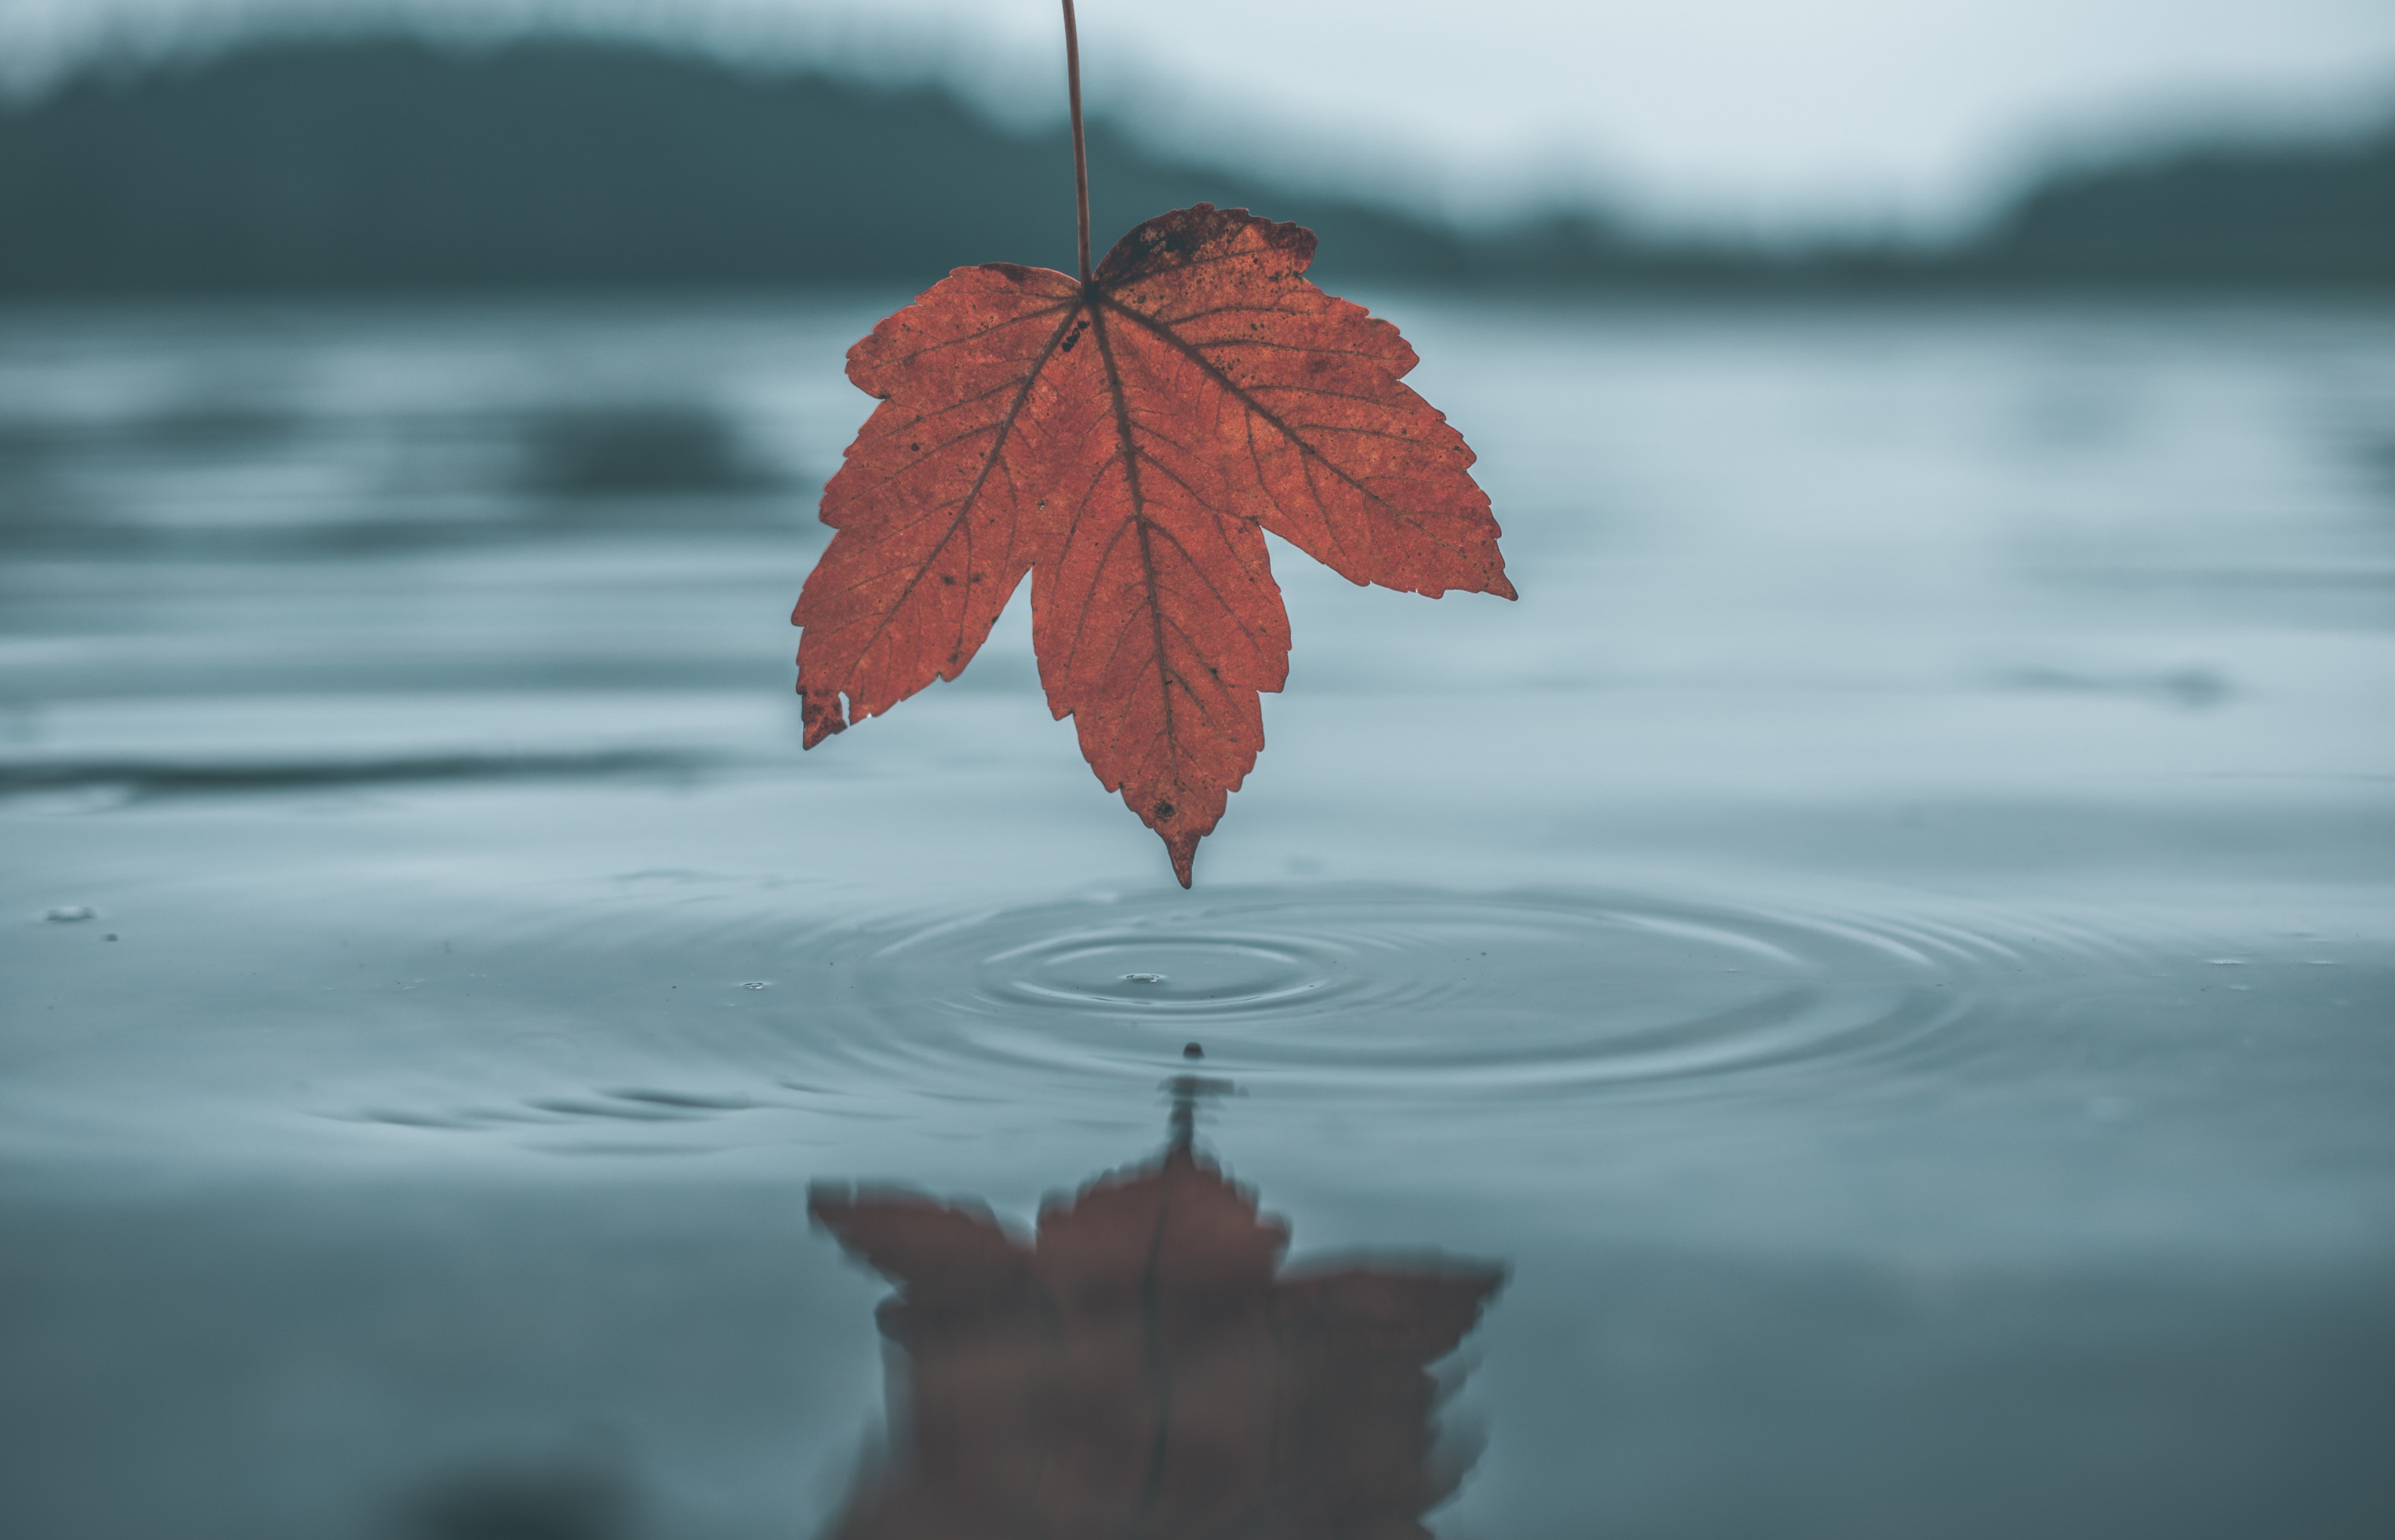 New Lock Screen Wallpapers sheet, nature, water, autumn, reflection, circles, leaf